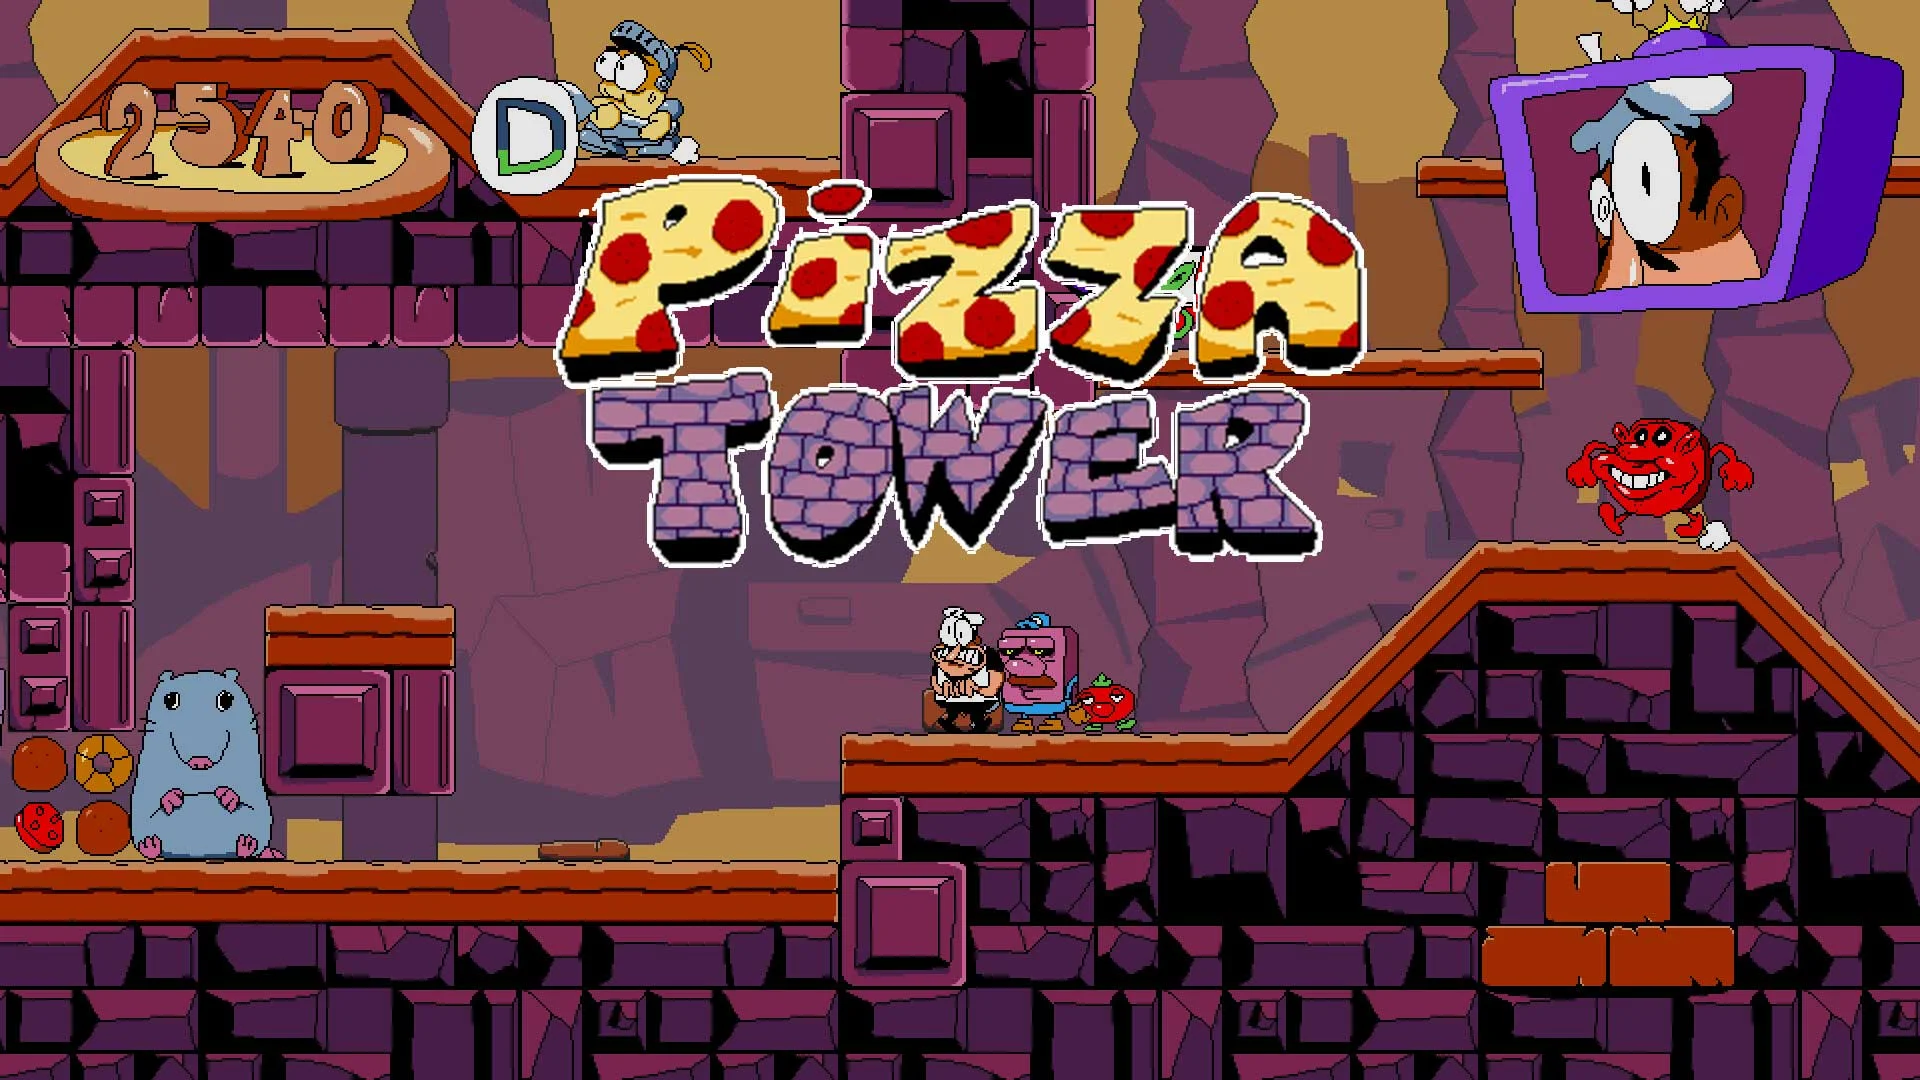 Top free games tagged Pizza Tower 